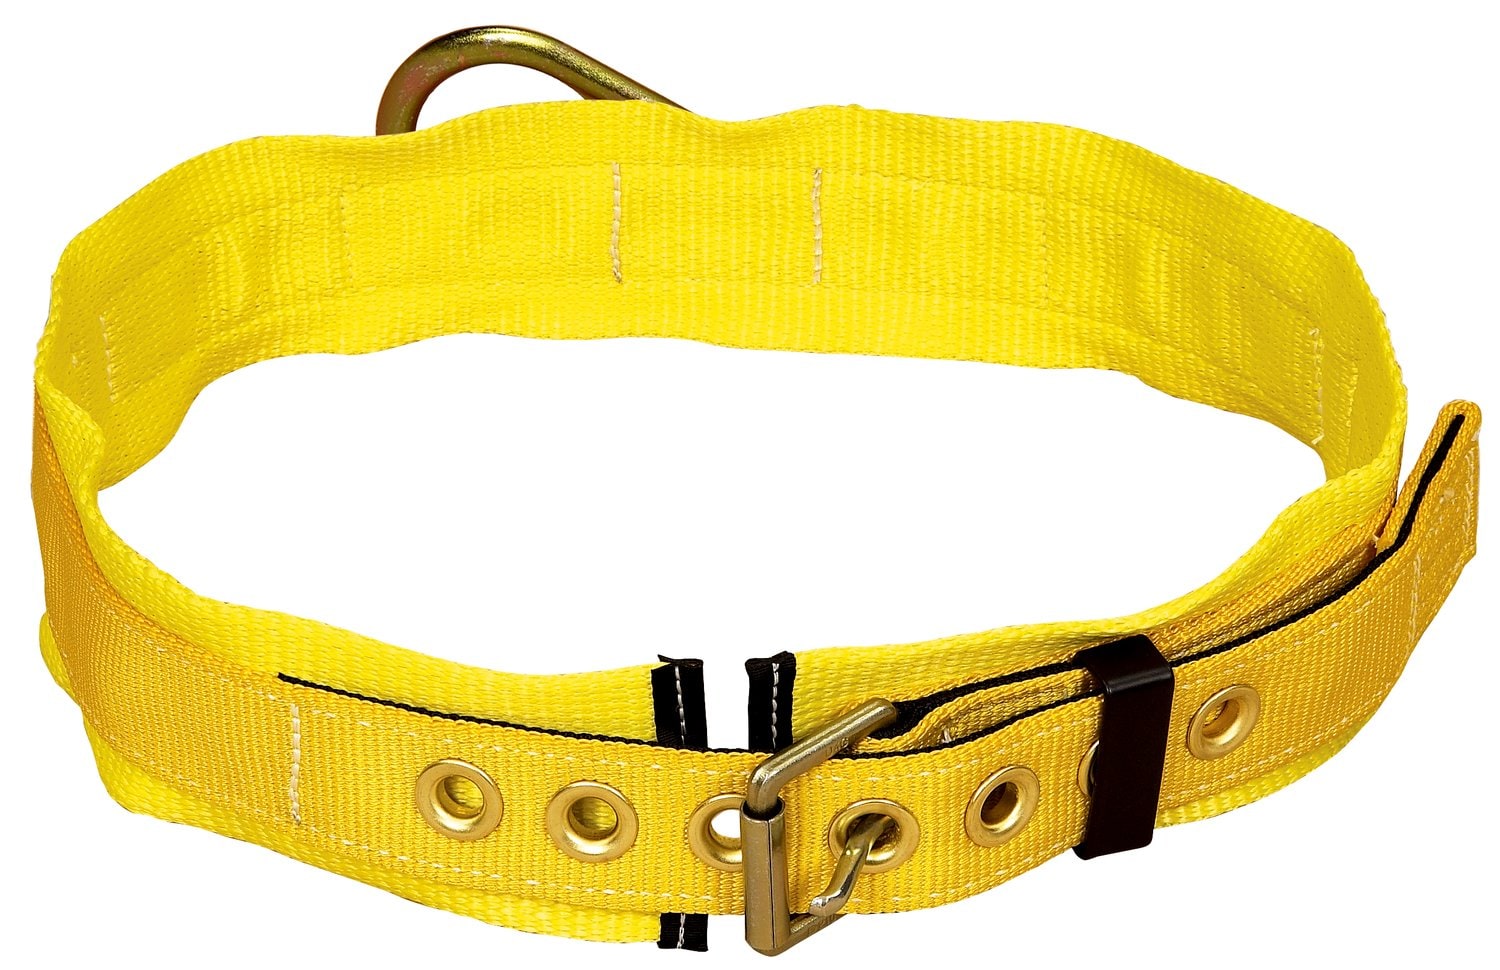 7012814927 - 3M DBI-SALA Tongue Buckle Restraint Belt with Hip Pad 1000004, Yellow, Large